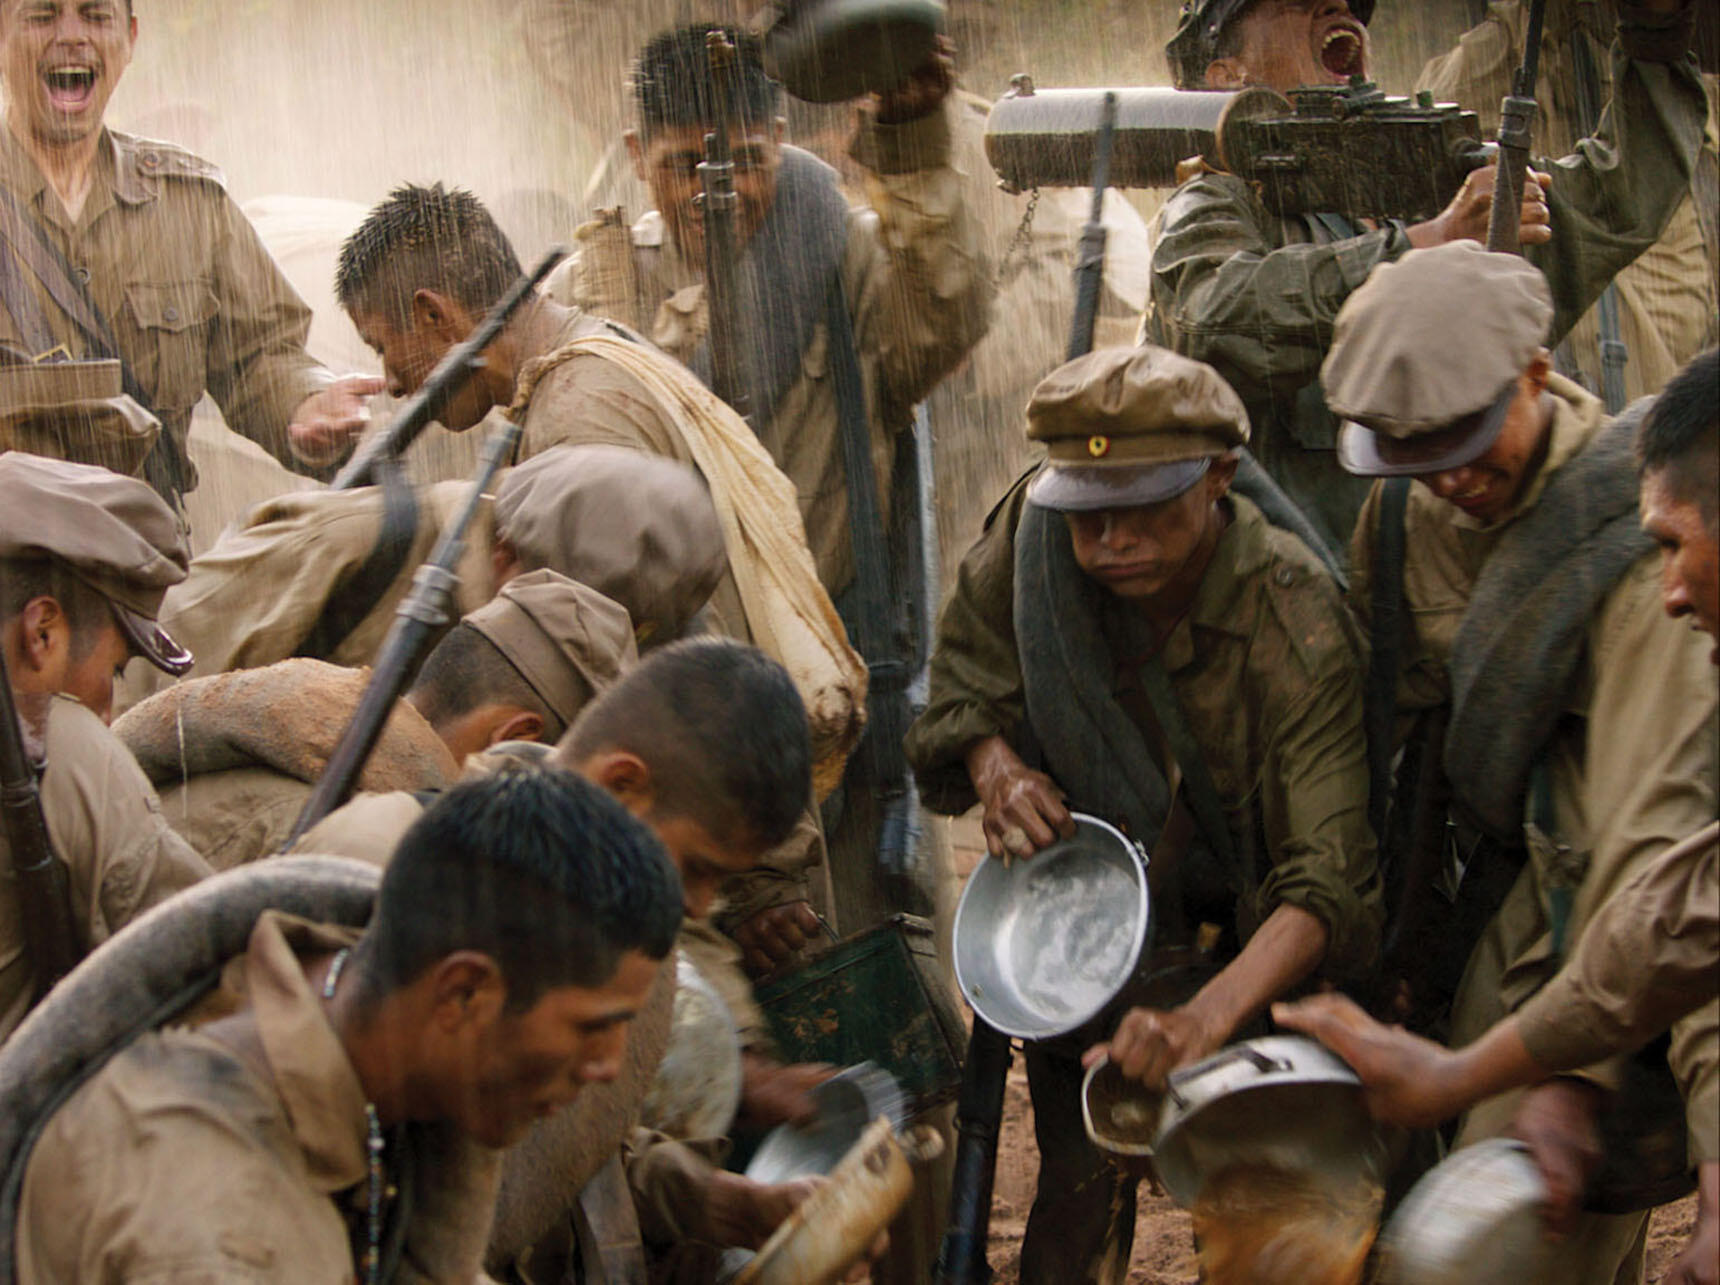 A still from “Chaco” shows soldiers’ delirium and euphoria when it finally rains — no one knows how to quench their thirst. (Image courtesy of Color_Monster, Pasto, and Murillo Cine.)